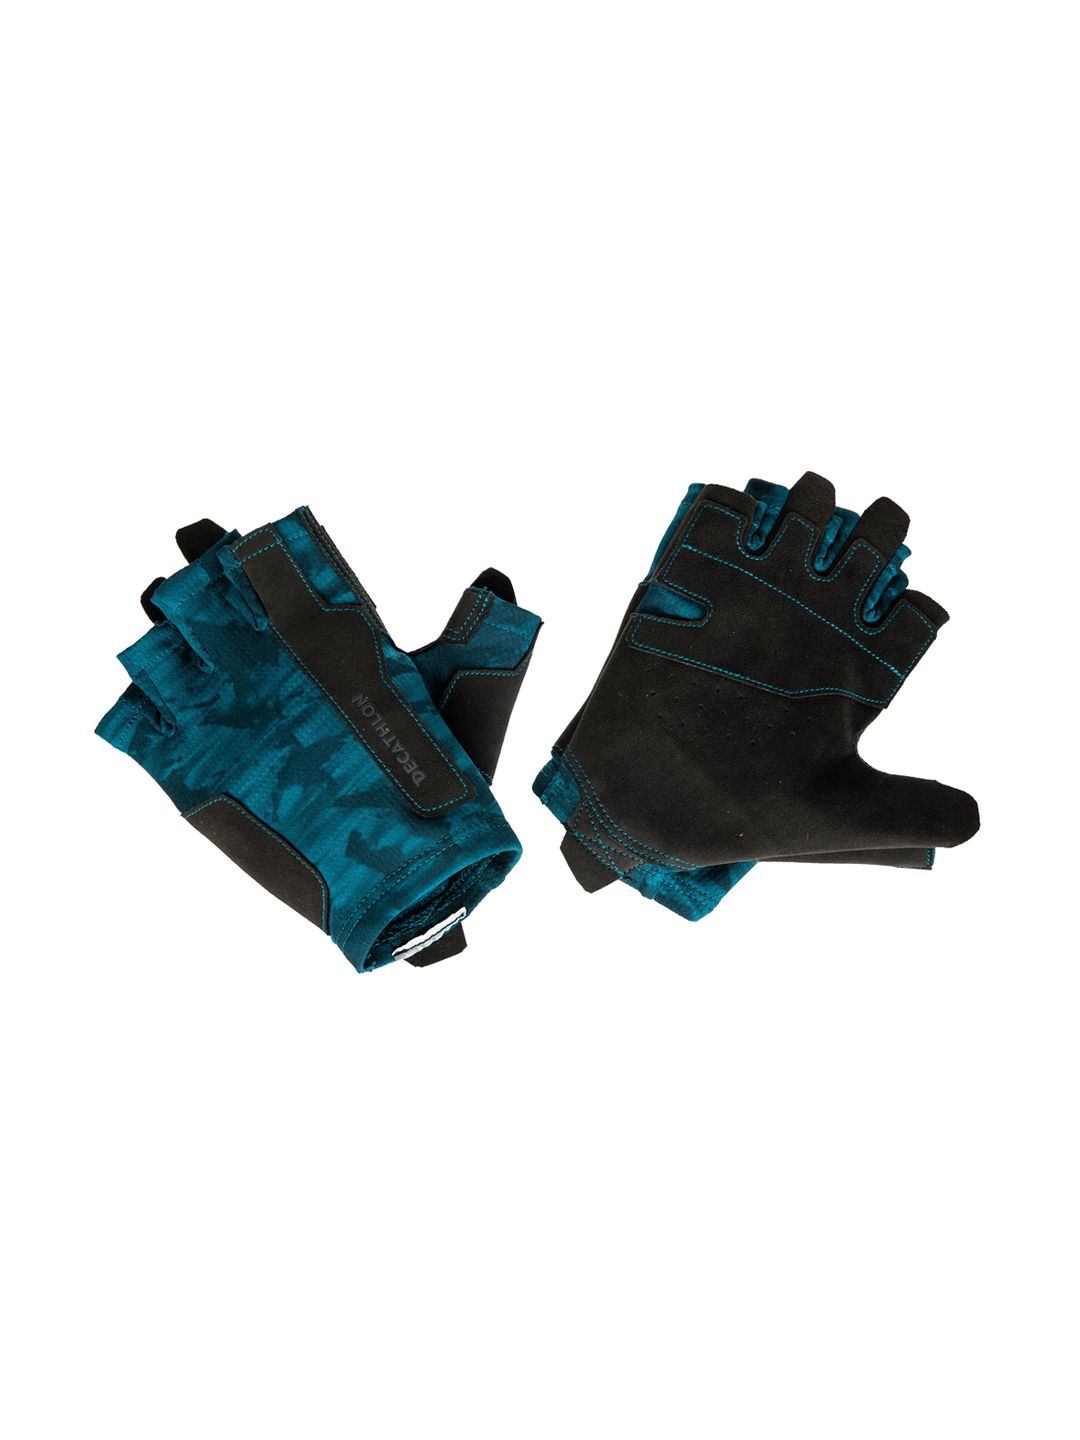 Domyos By Decathlon Blue & Black Printed Weight Training Gym Gloves Price in India